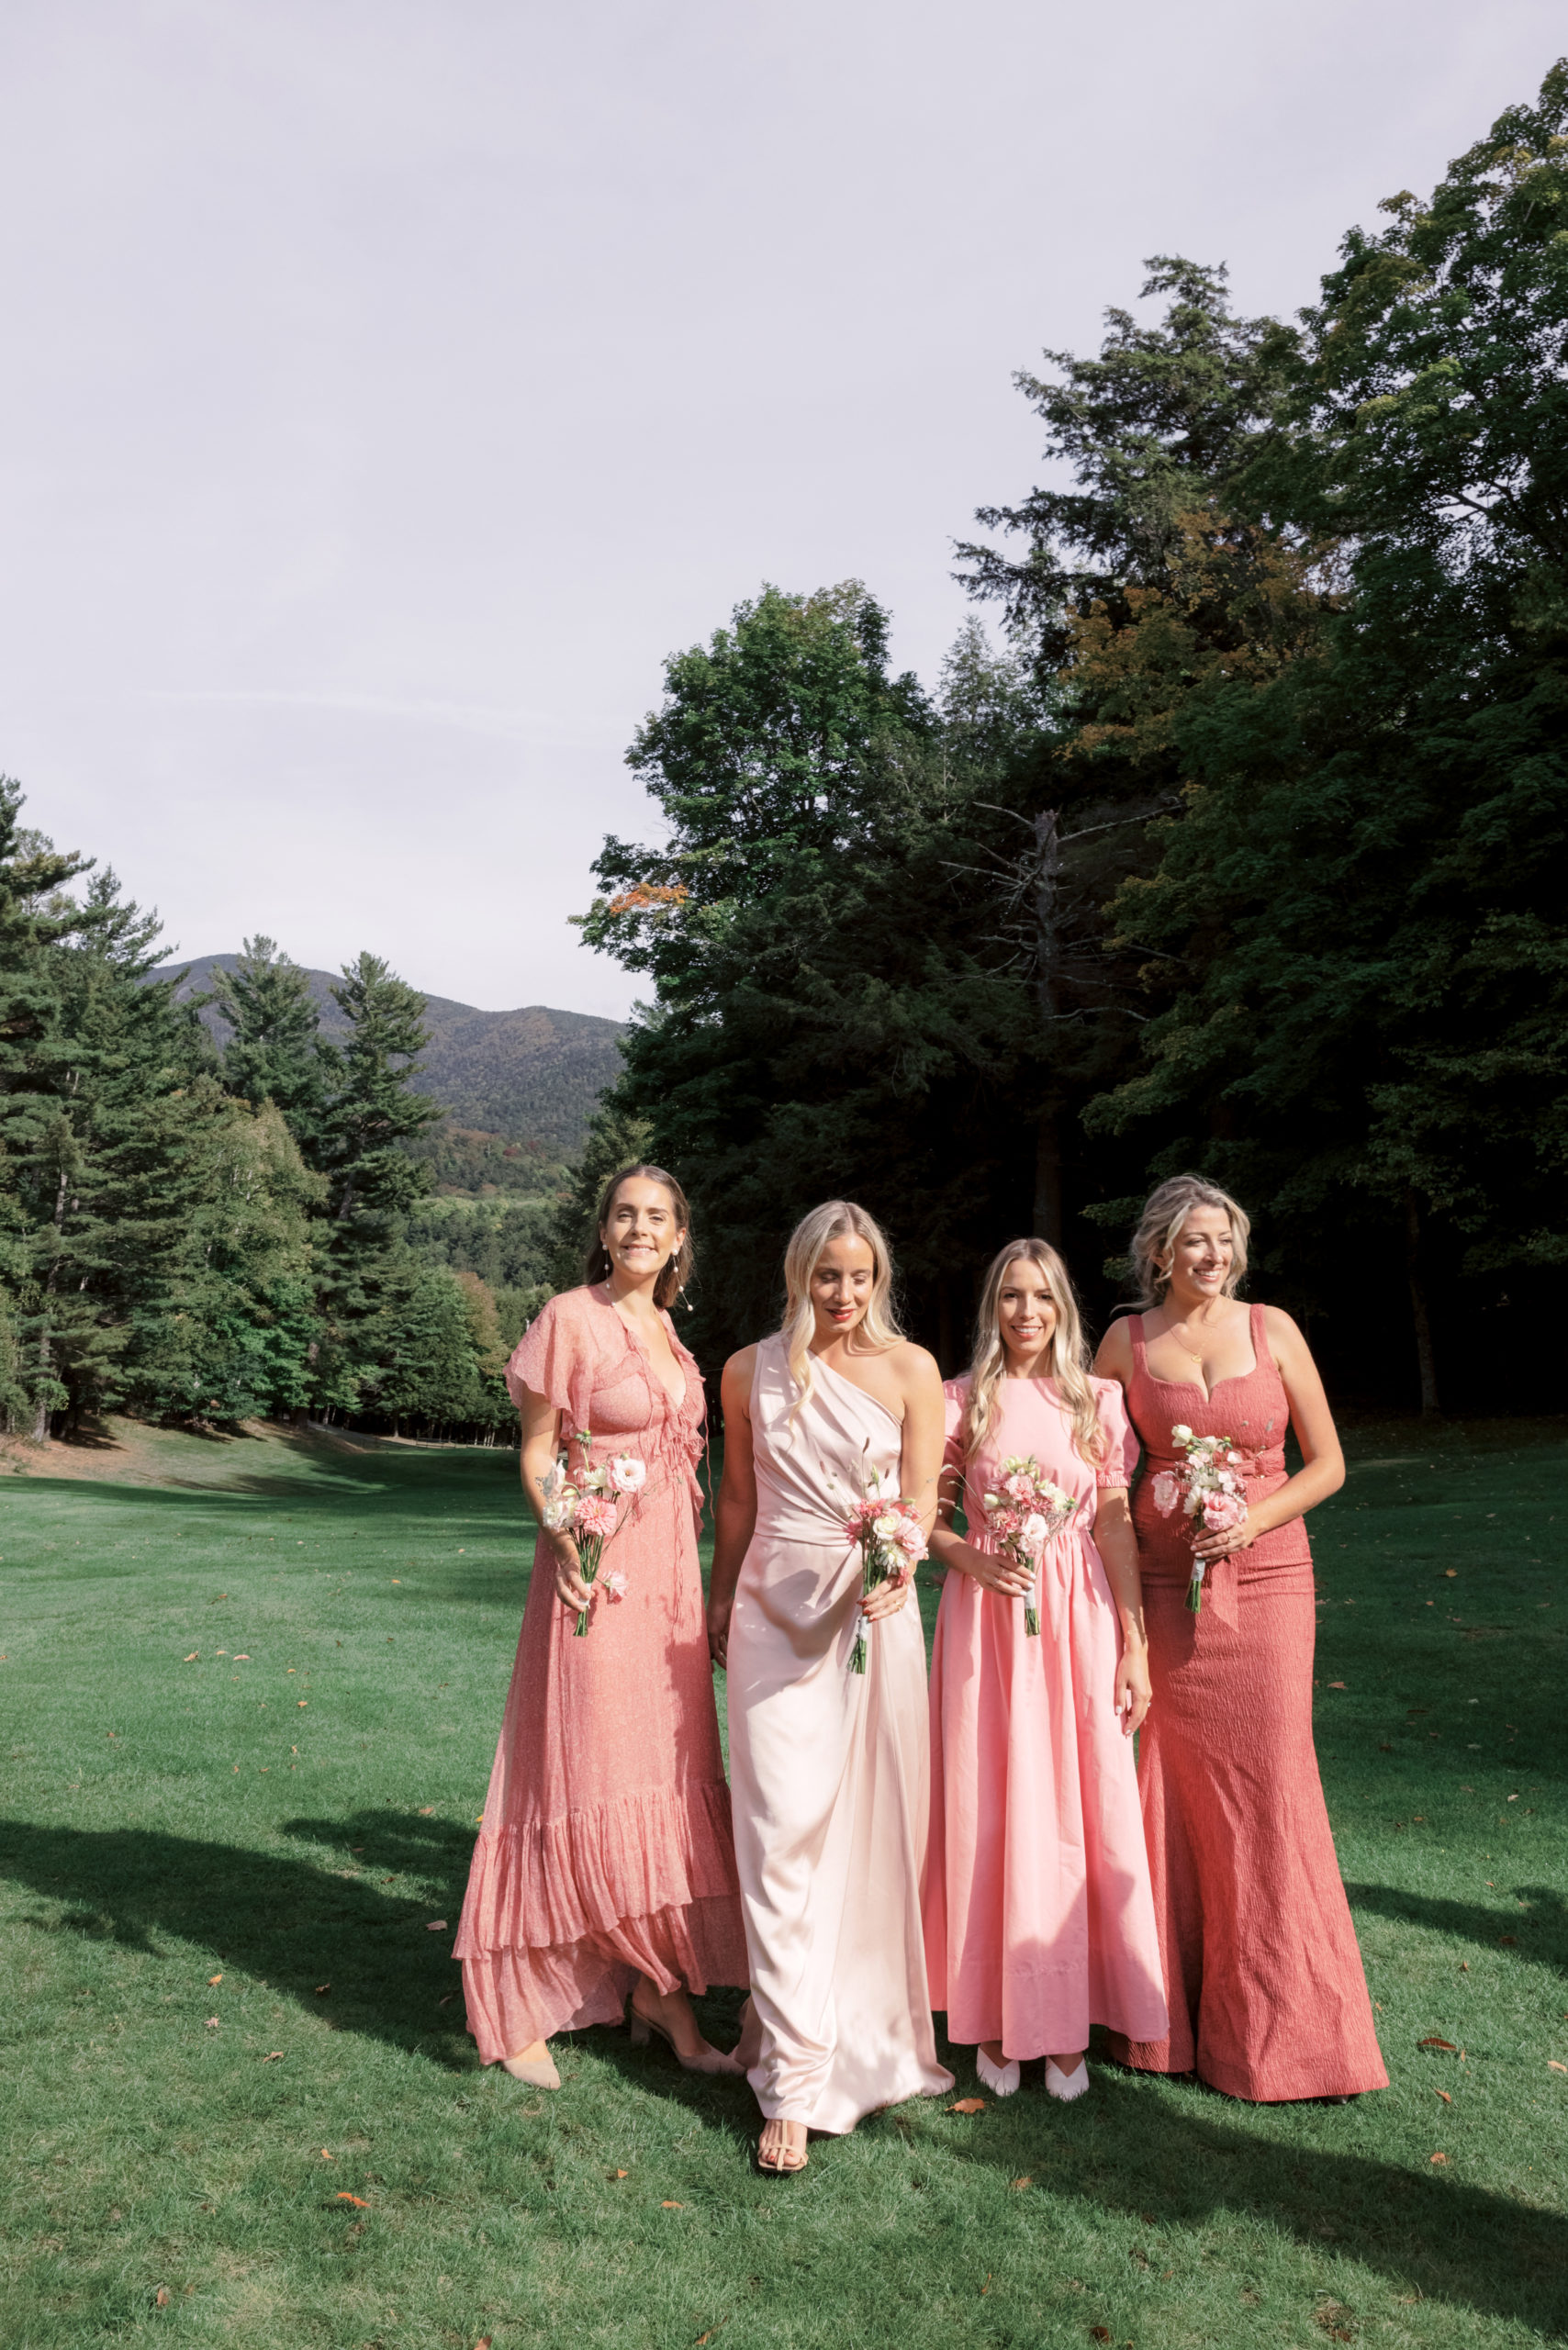 The bridesmaids are wearing 2022 bridesmaid dresses. Editorial wedding image by Jenny Fu Studio.